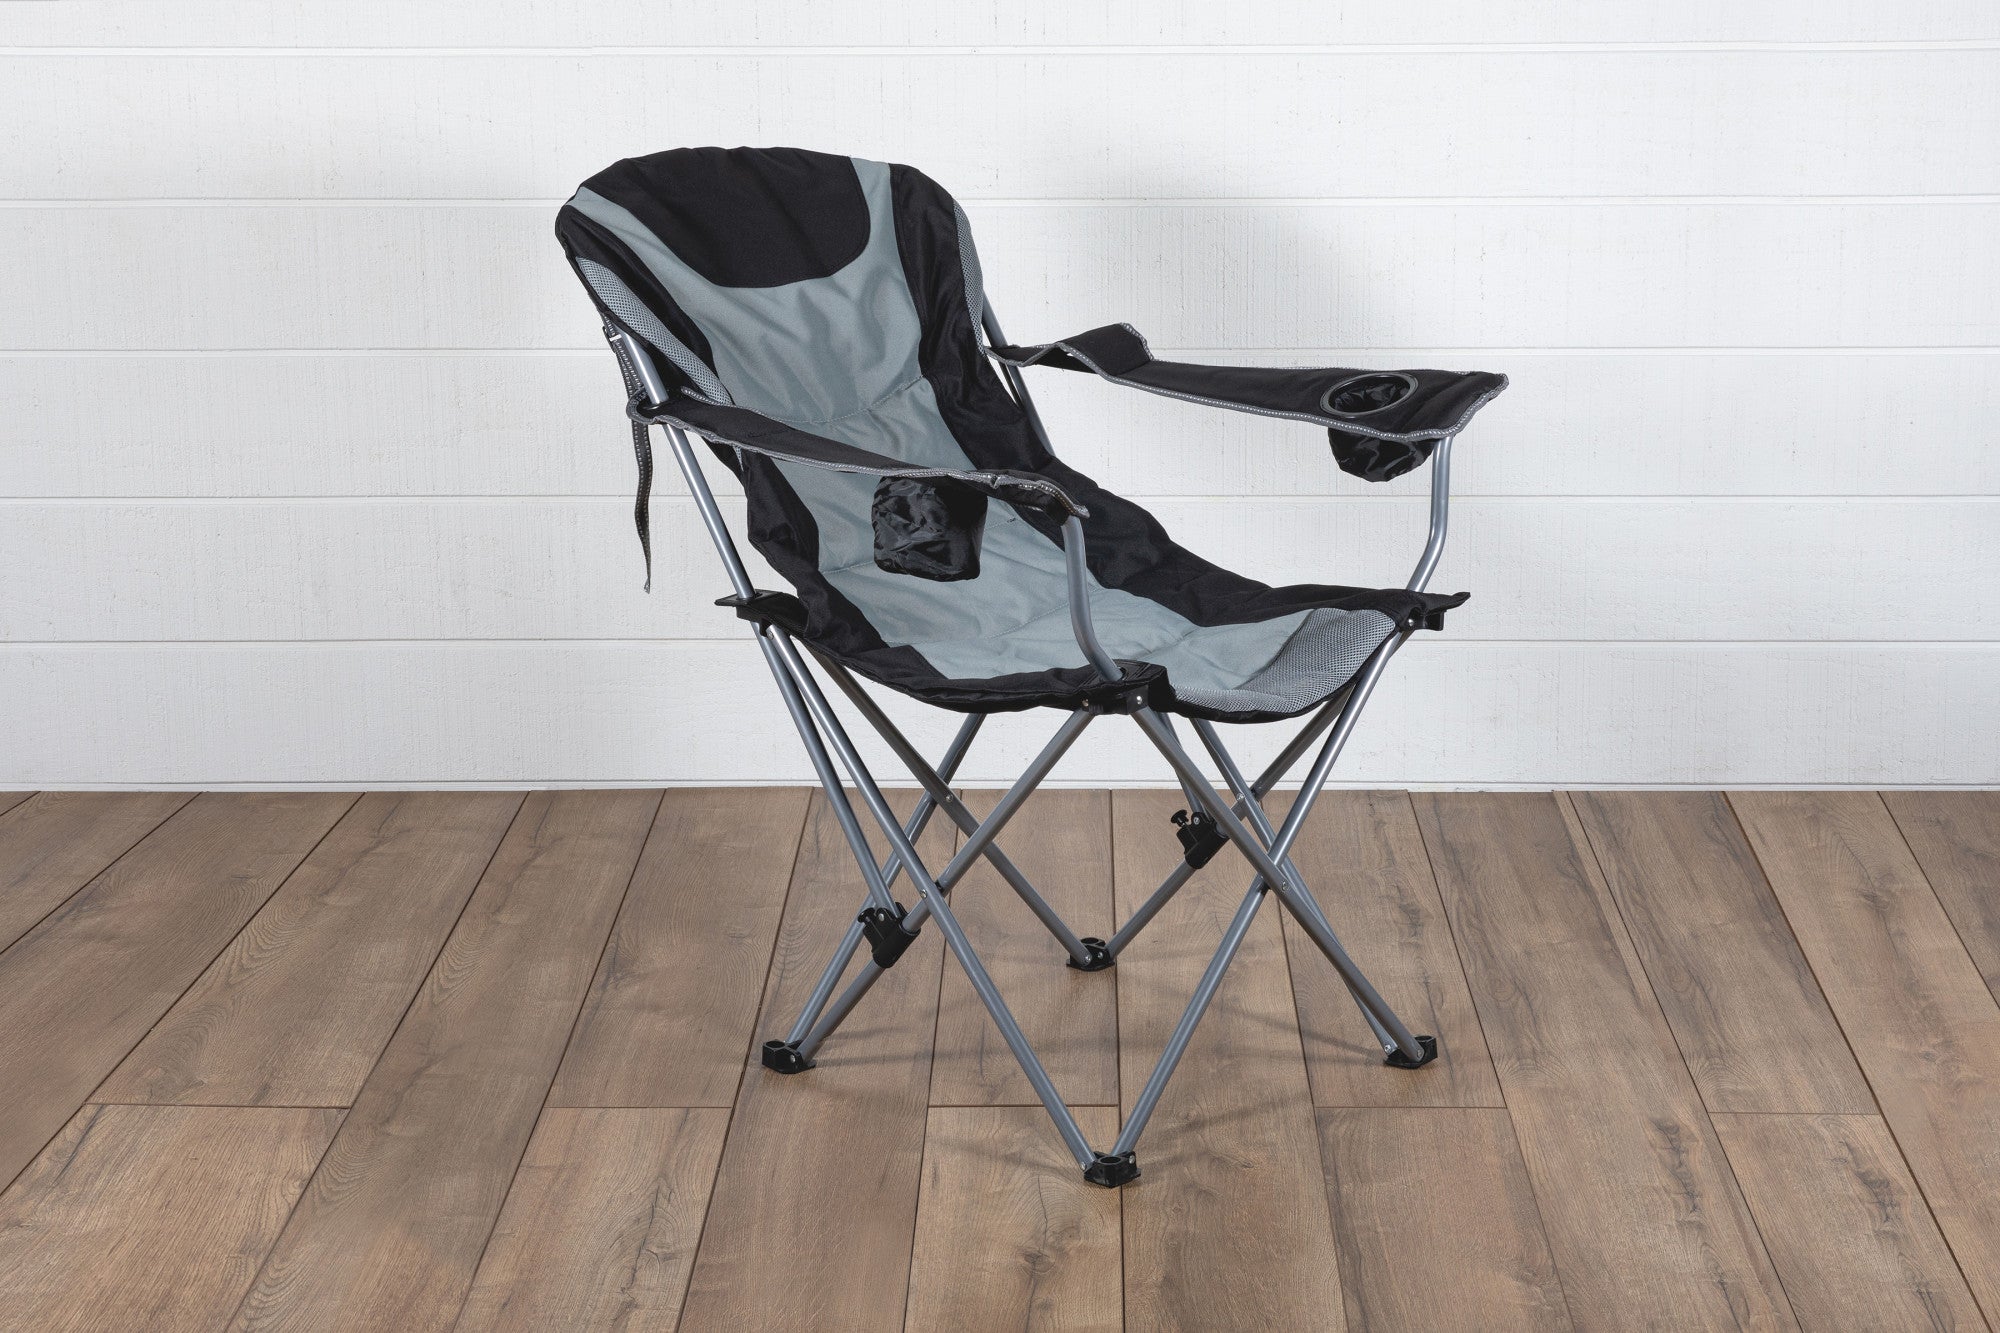 New Jersey Devils - Reclining Camp Chair